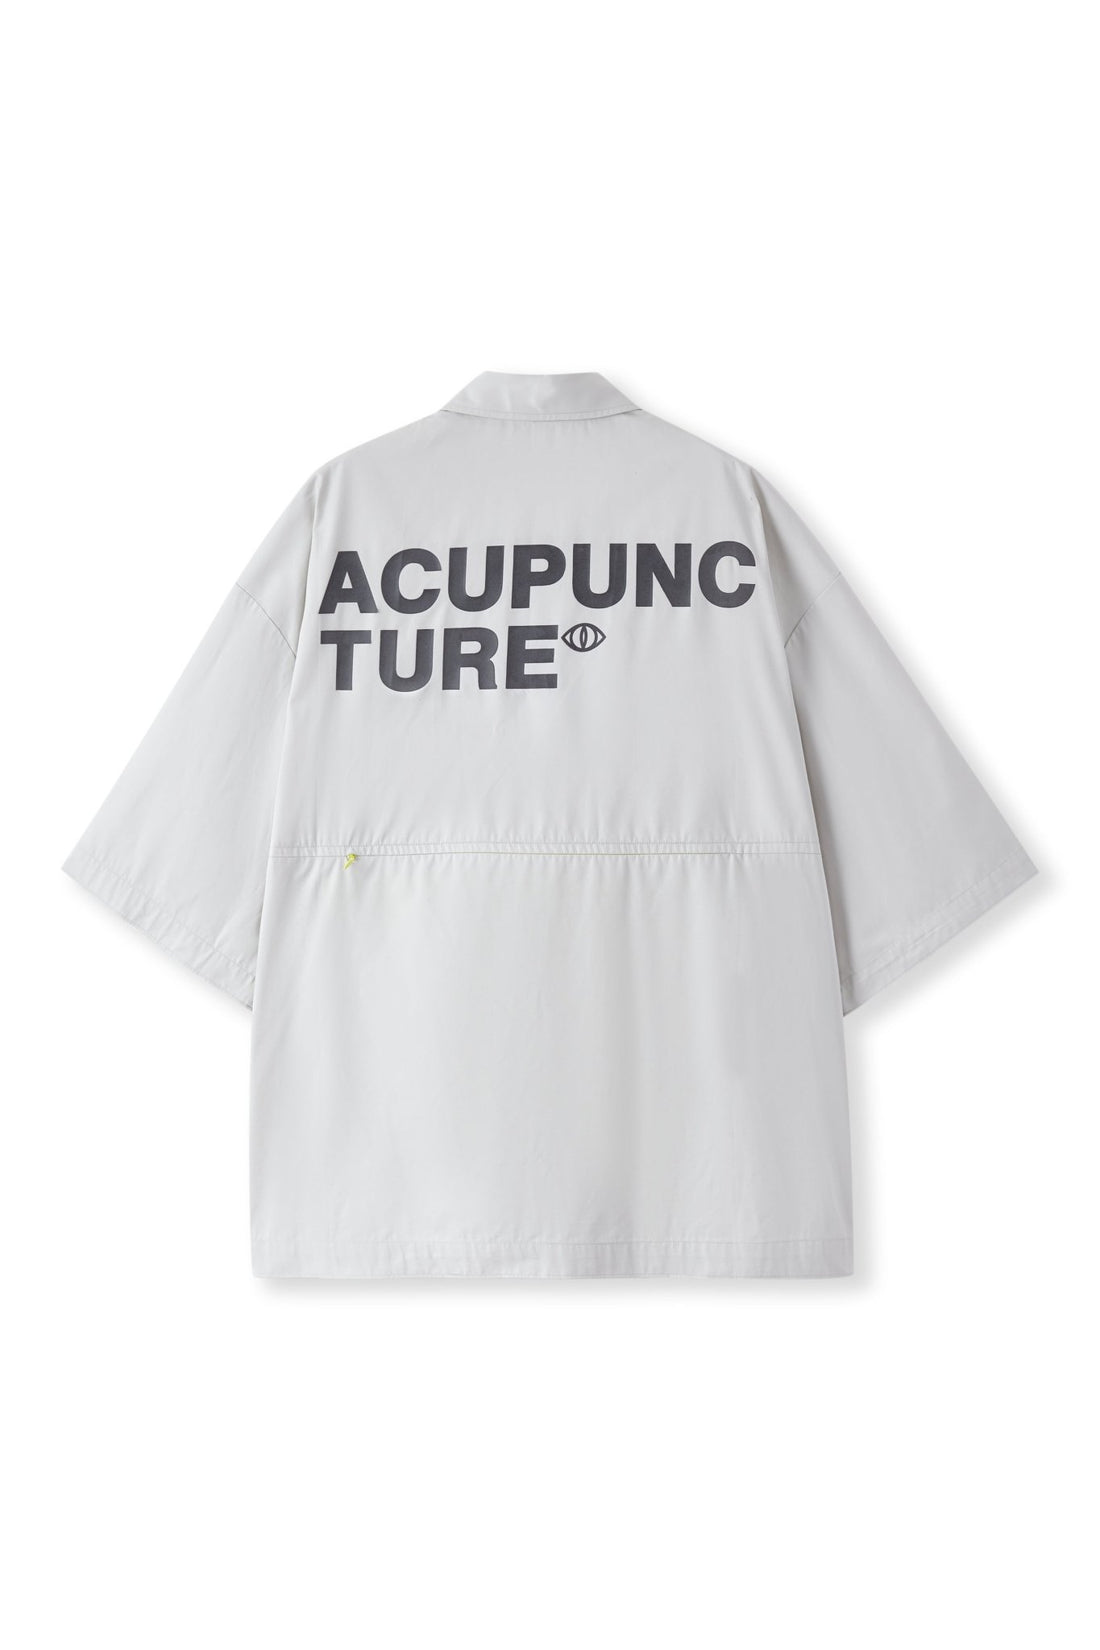 THE PUPIL SHIRT LIGHT GREY Acupuncture